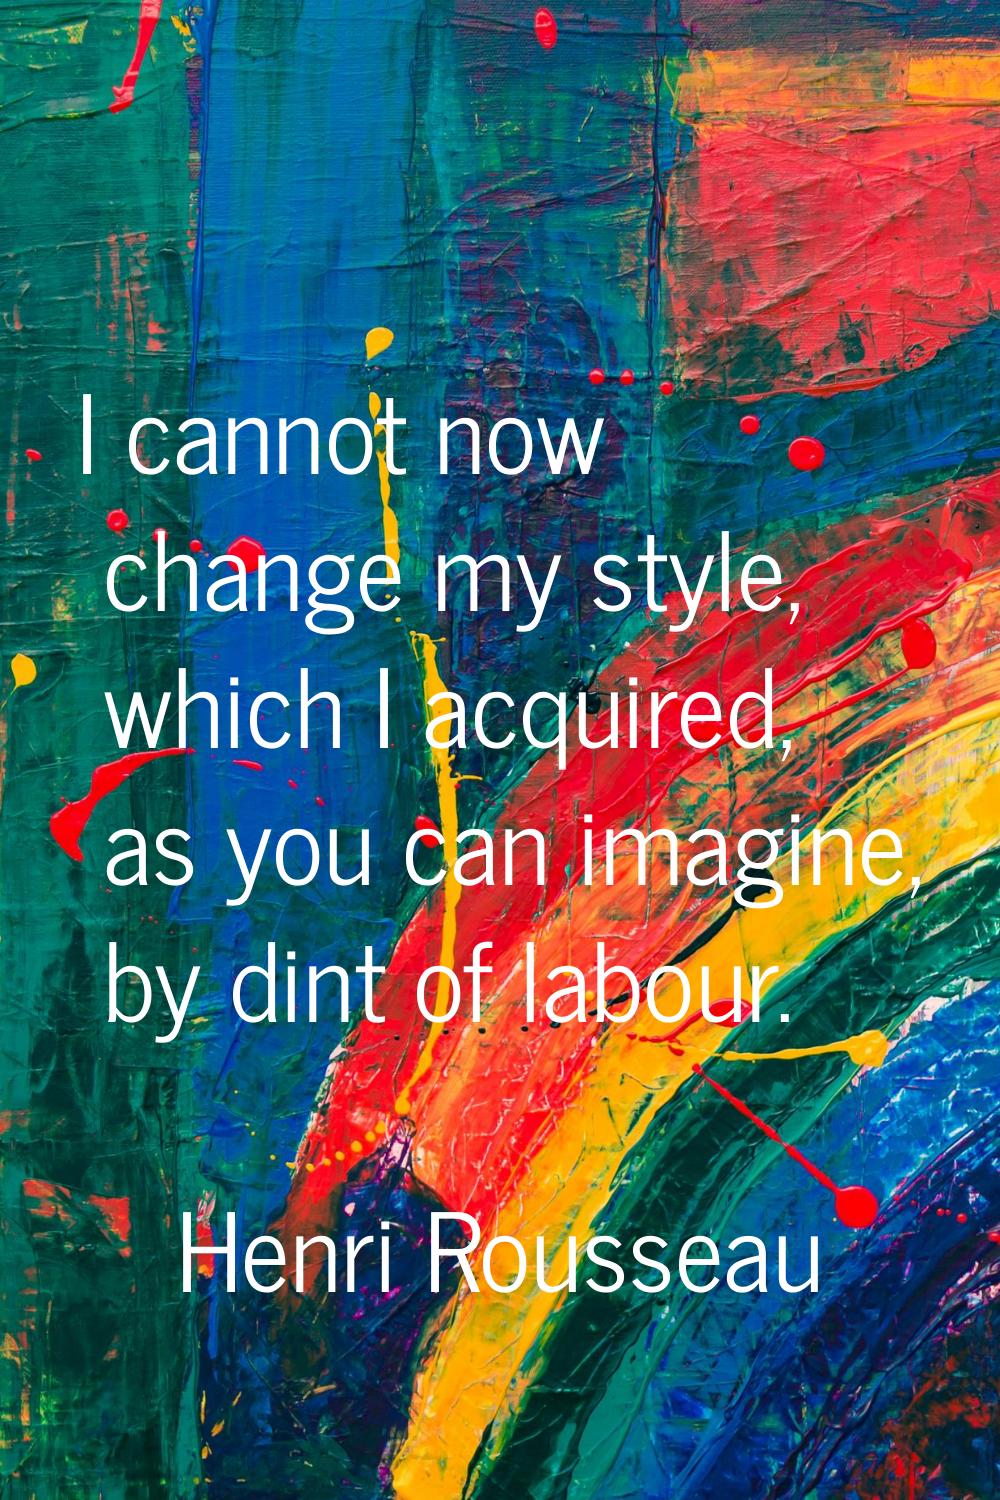 I cannot now change my style, which I acquired, as you can imagine, by dint of labour.